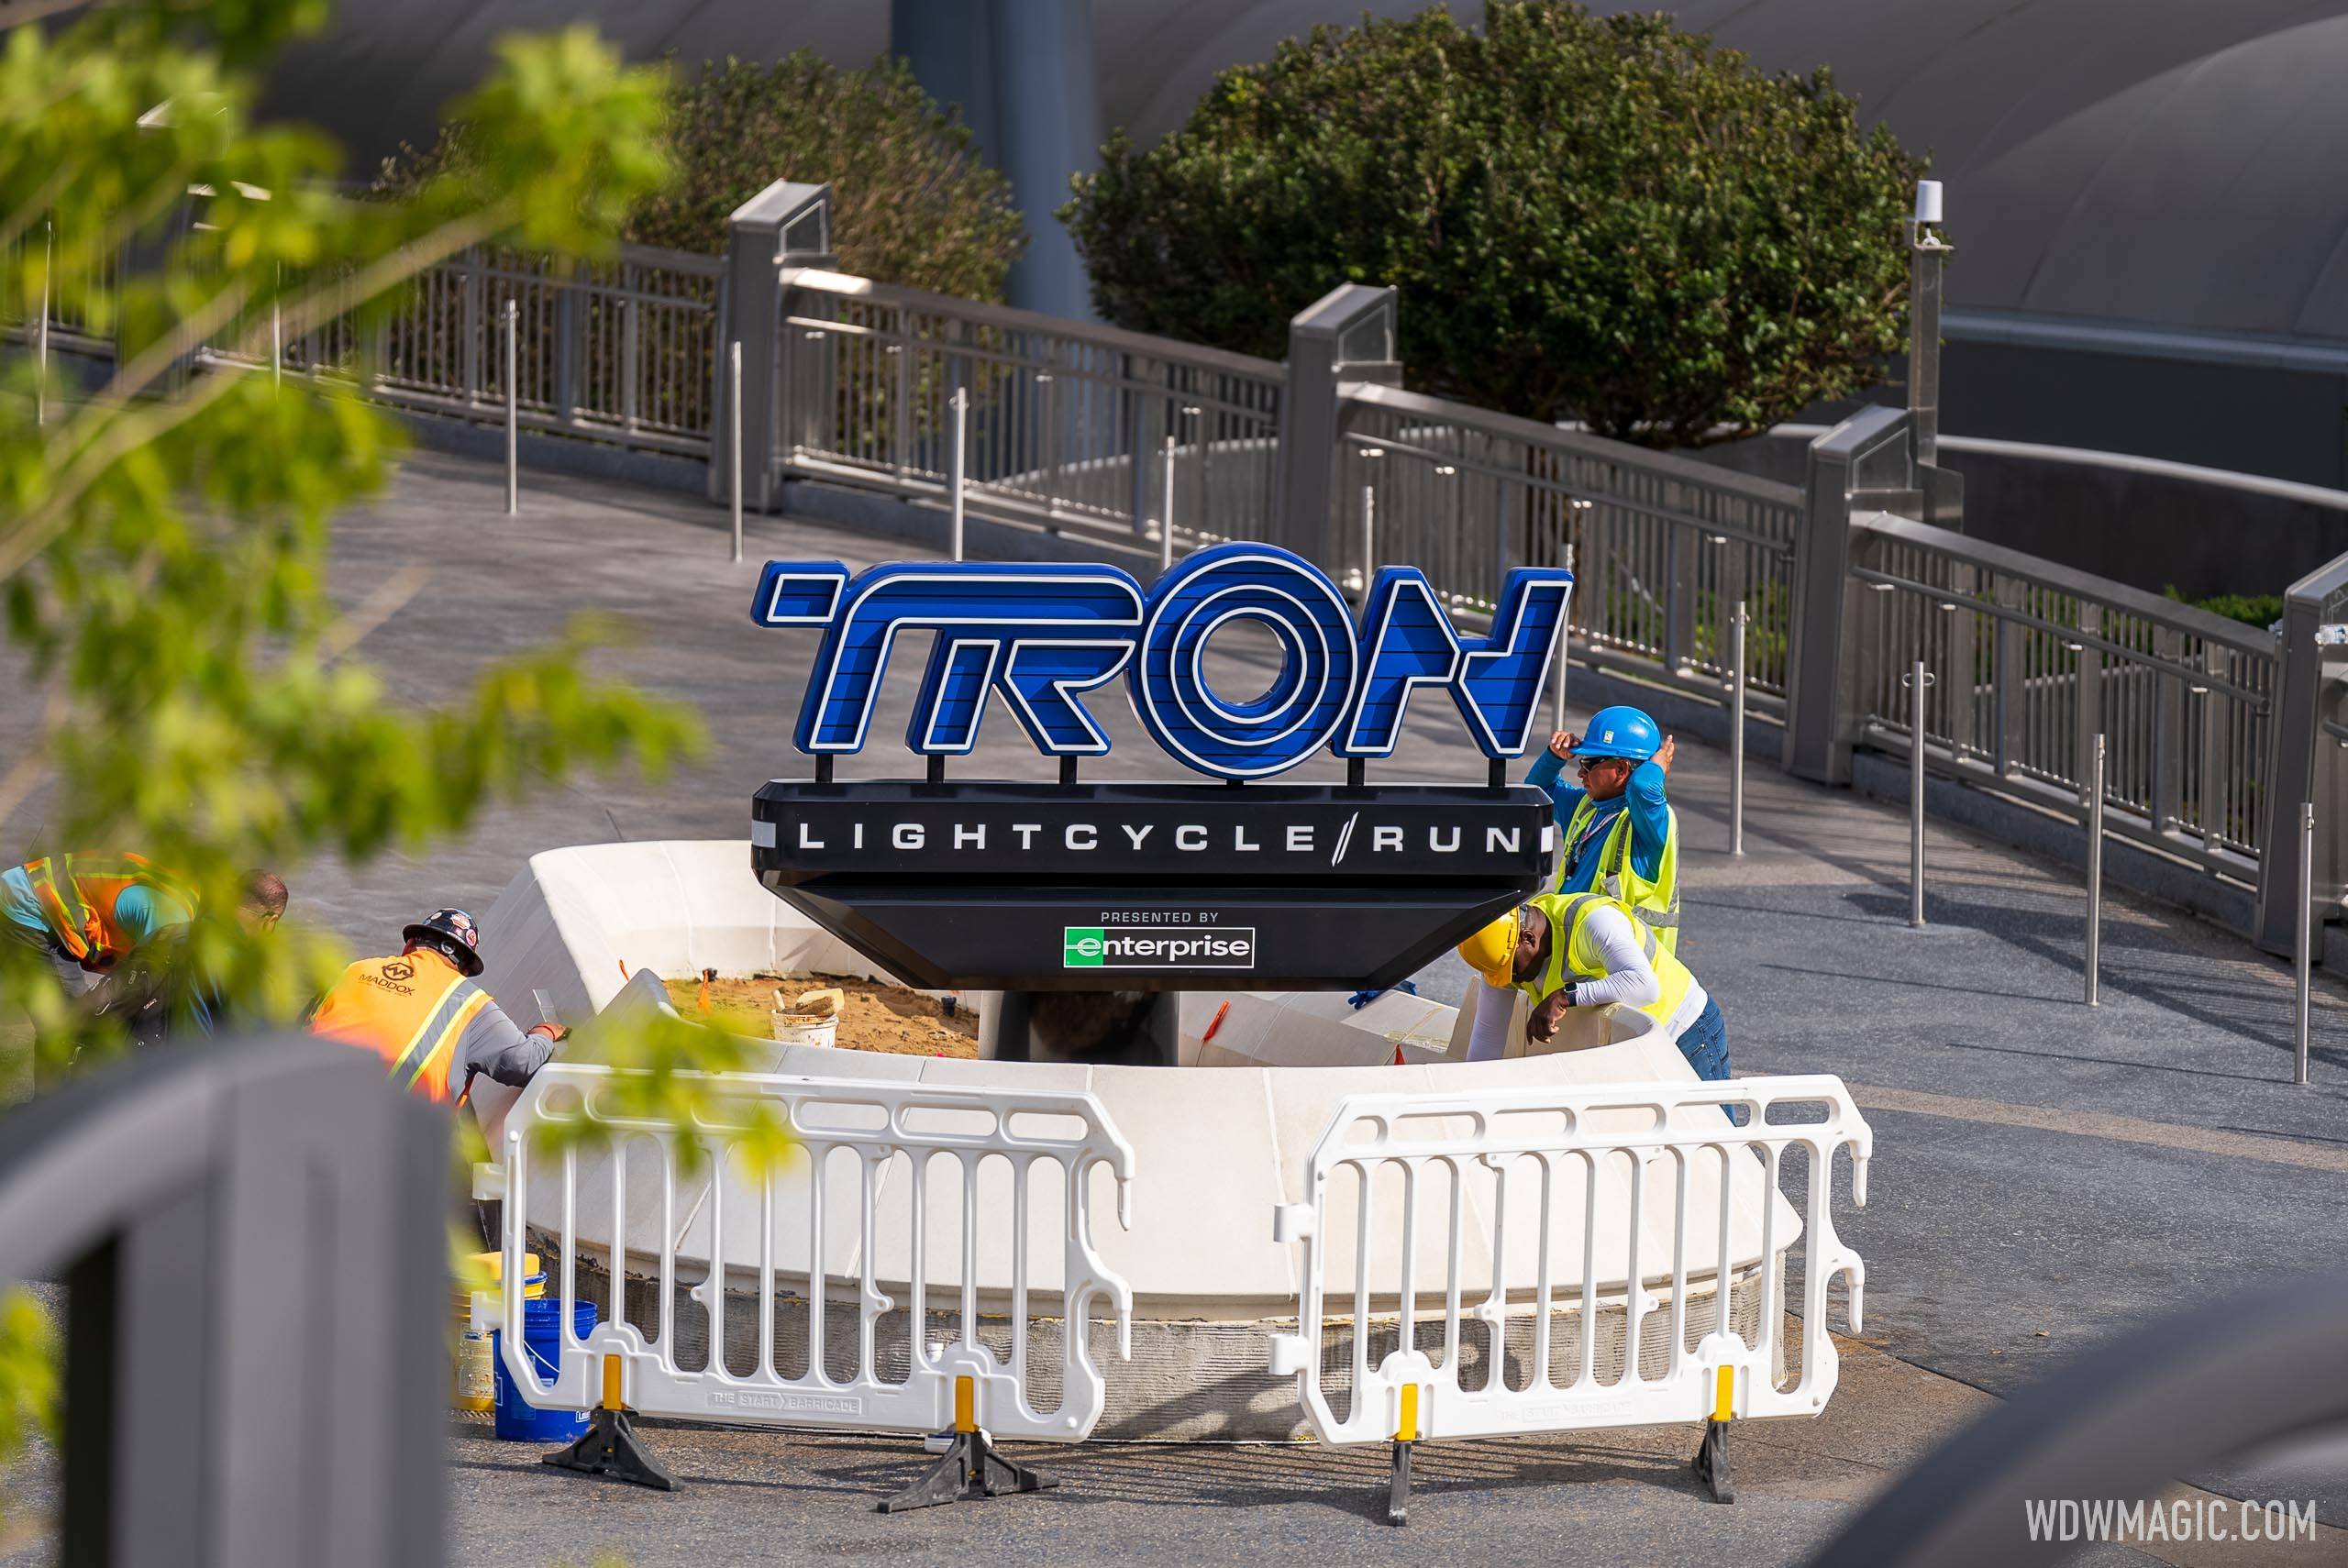 More views of the TRON Lightcycle Run marquee sign